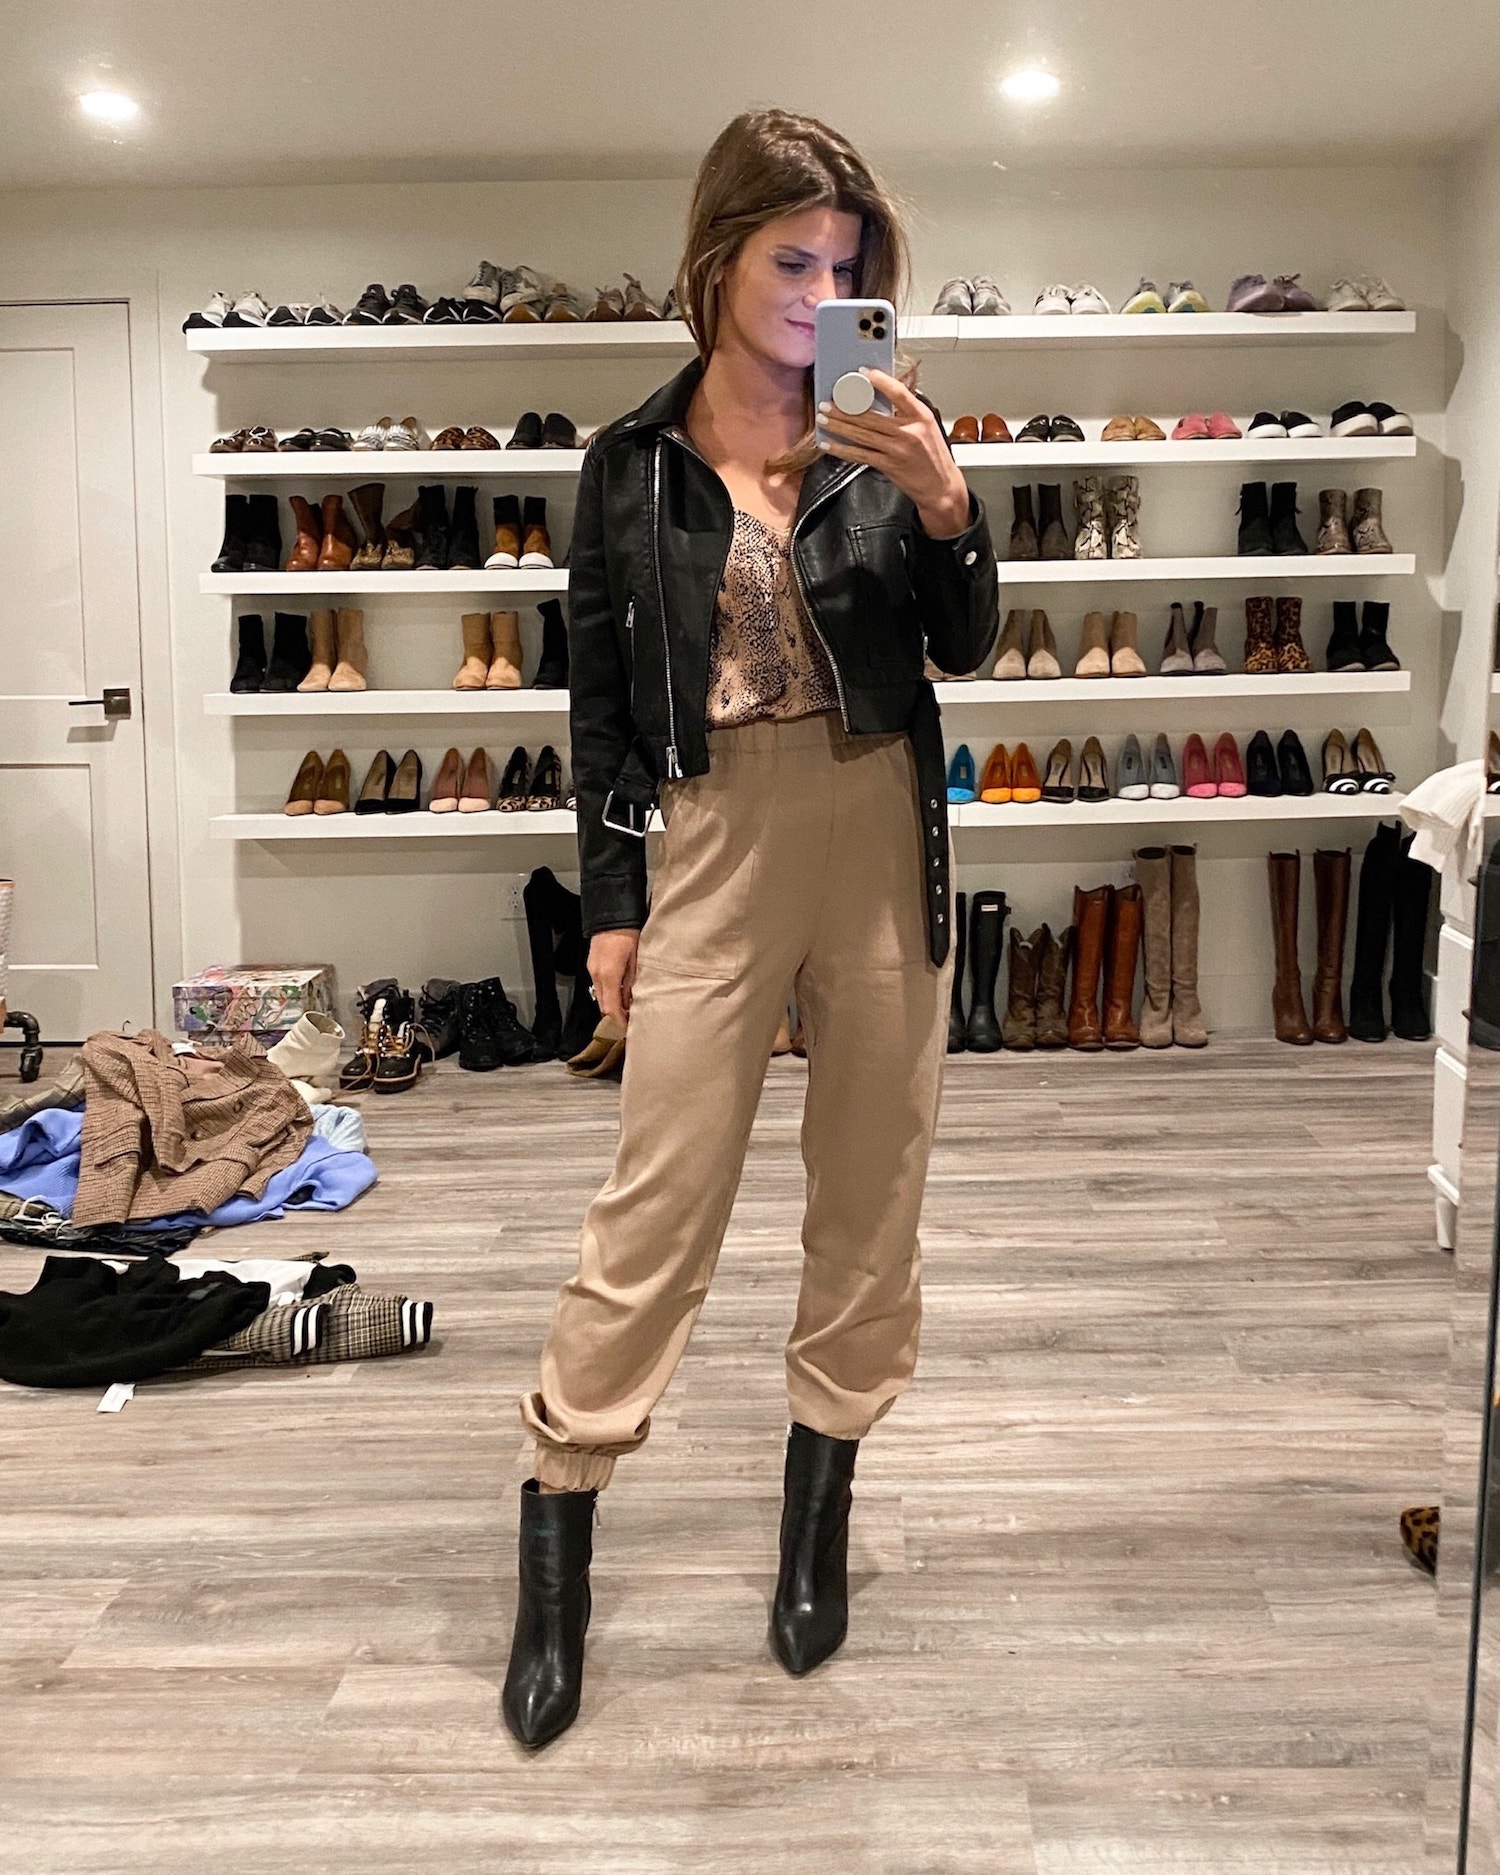 Brighton Keller wearing tan joggers, camisole, leather jacket and black booties